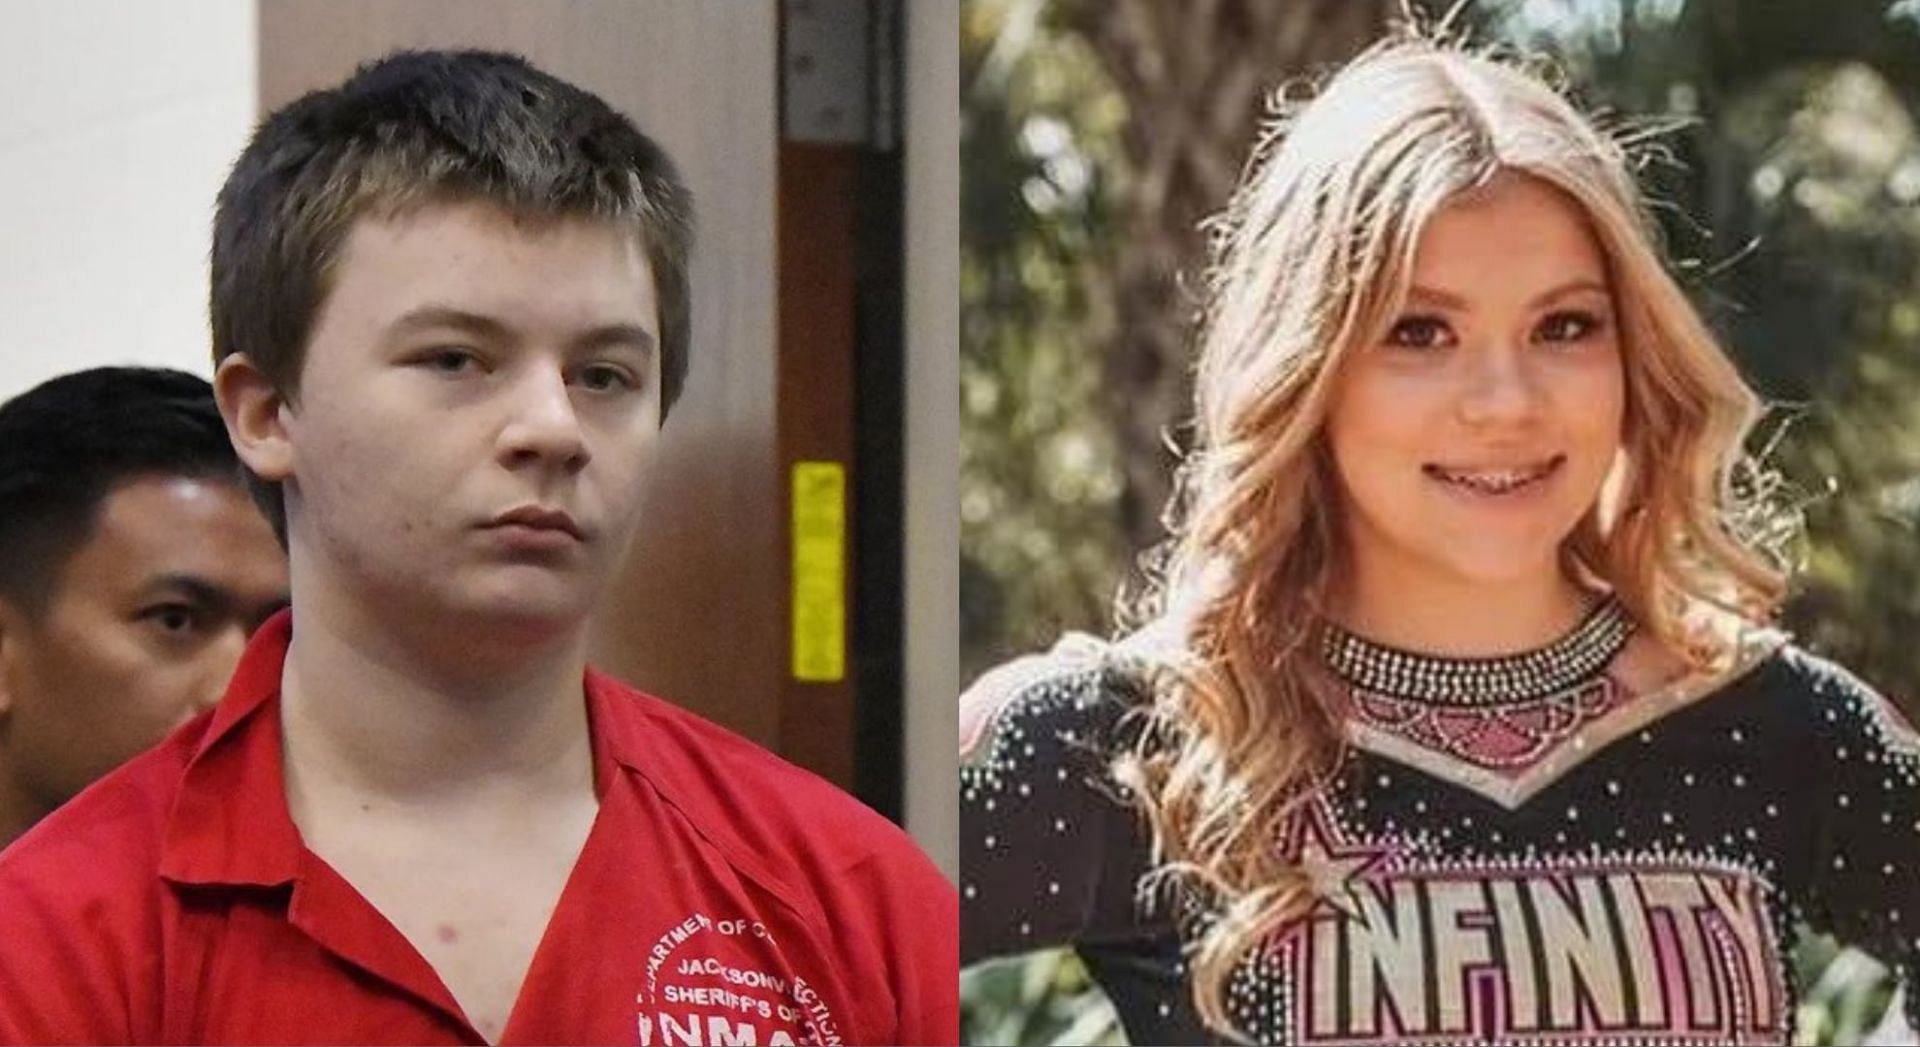 Aiden Fucci was sentenced to life in prison for killing 13-year-old Tristyn Bailey in 2021 (Image via @/crimewithbobby/Twitter)